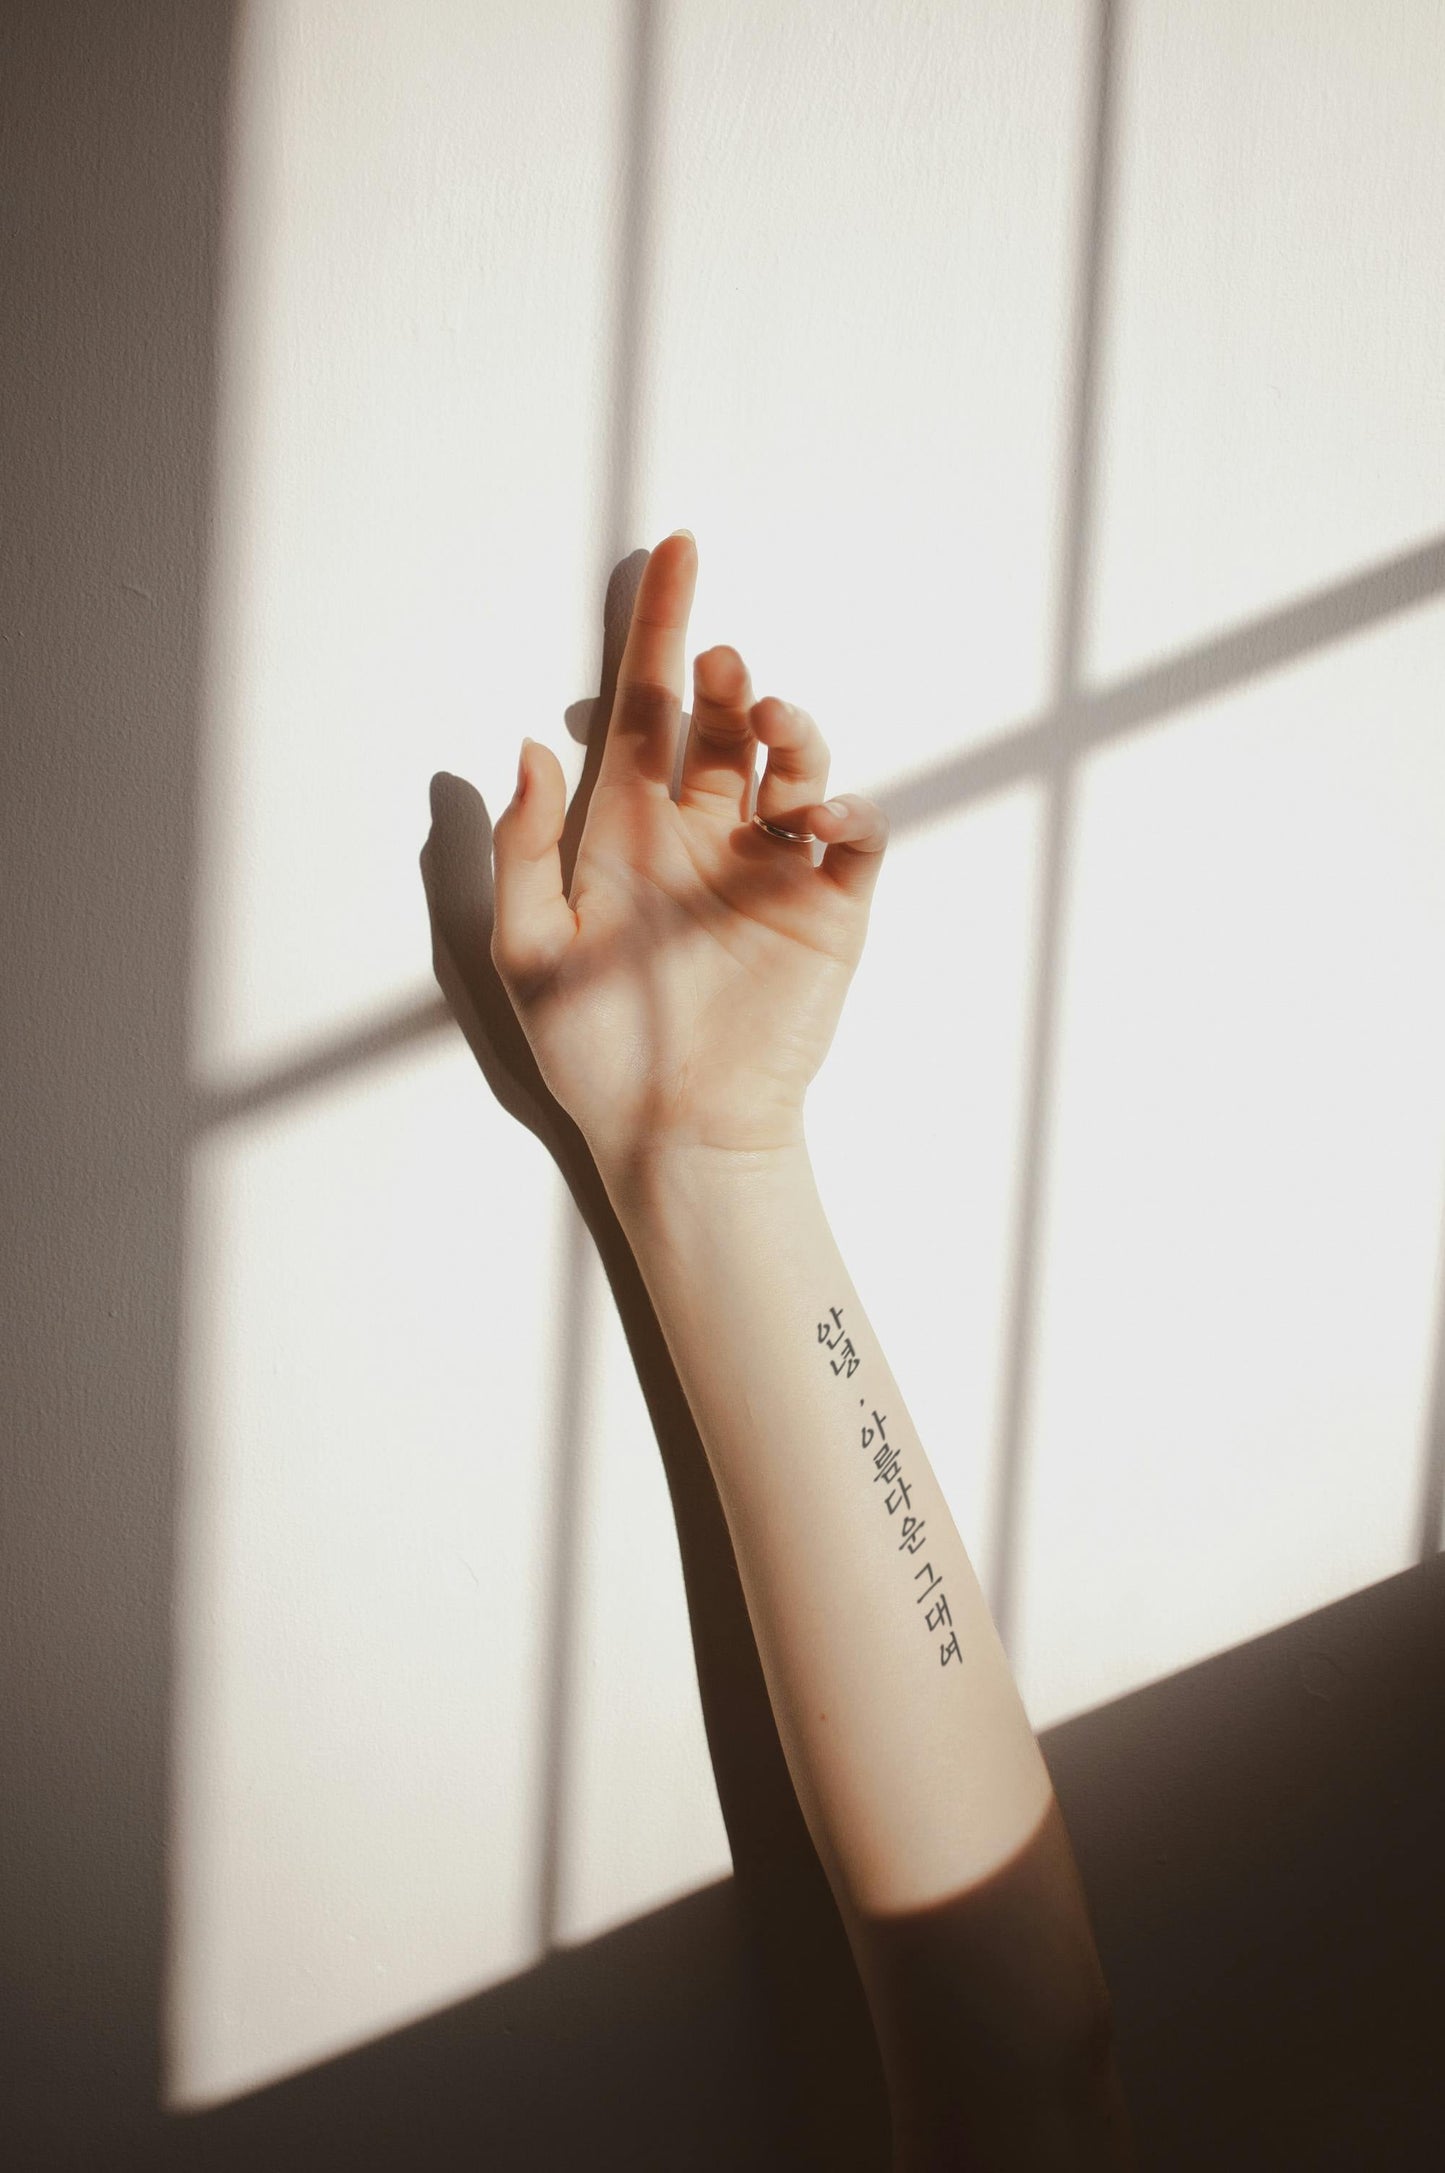 Sunlit silhouette of a hand gesture with a temporary Korean tattoo in Hangul script on the forearm against a white background.